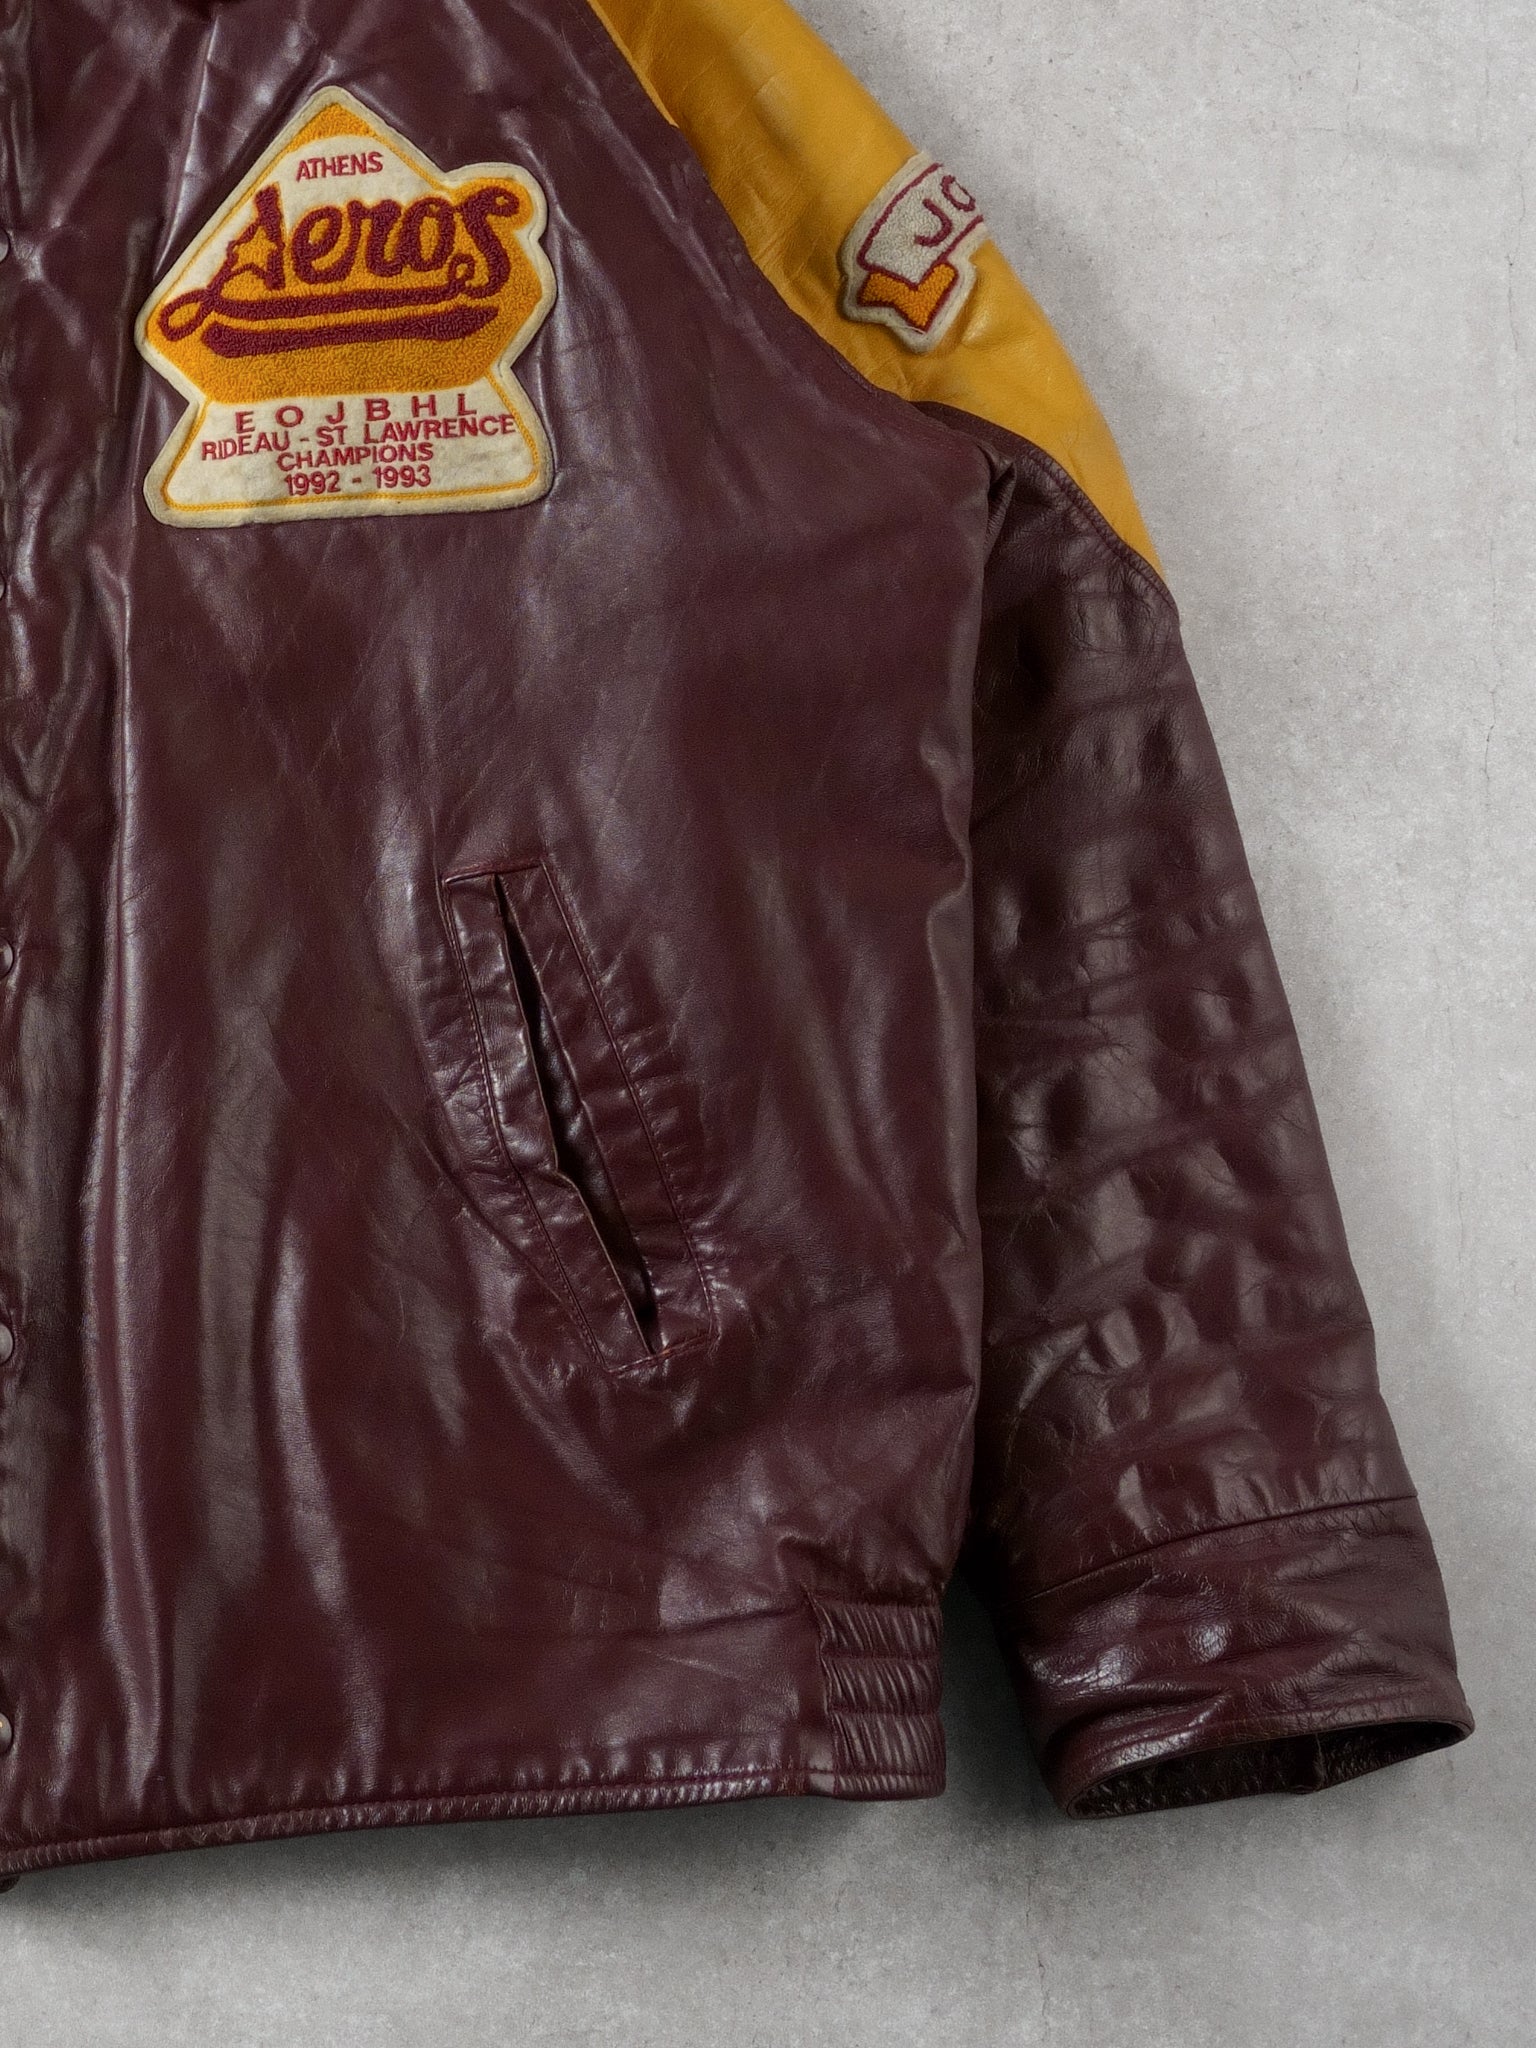 Vintage 93' Maroon and Yellow Athens Aeros Leather Jacket (L)